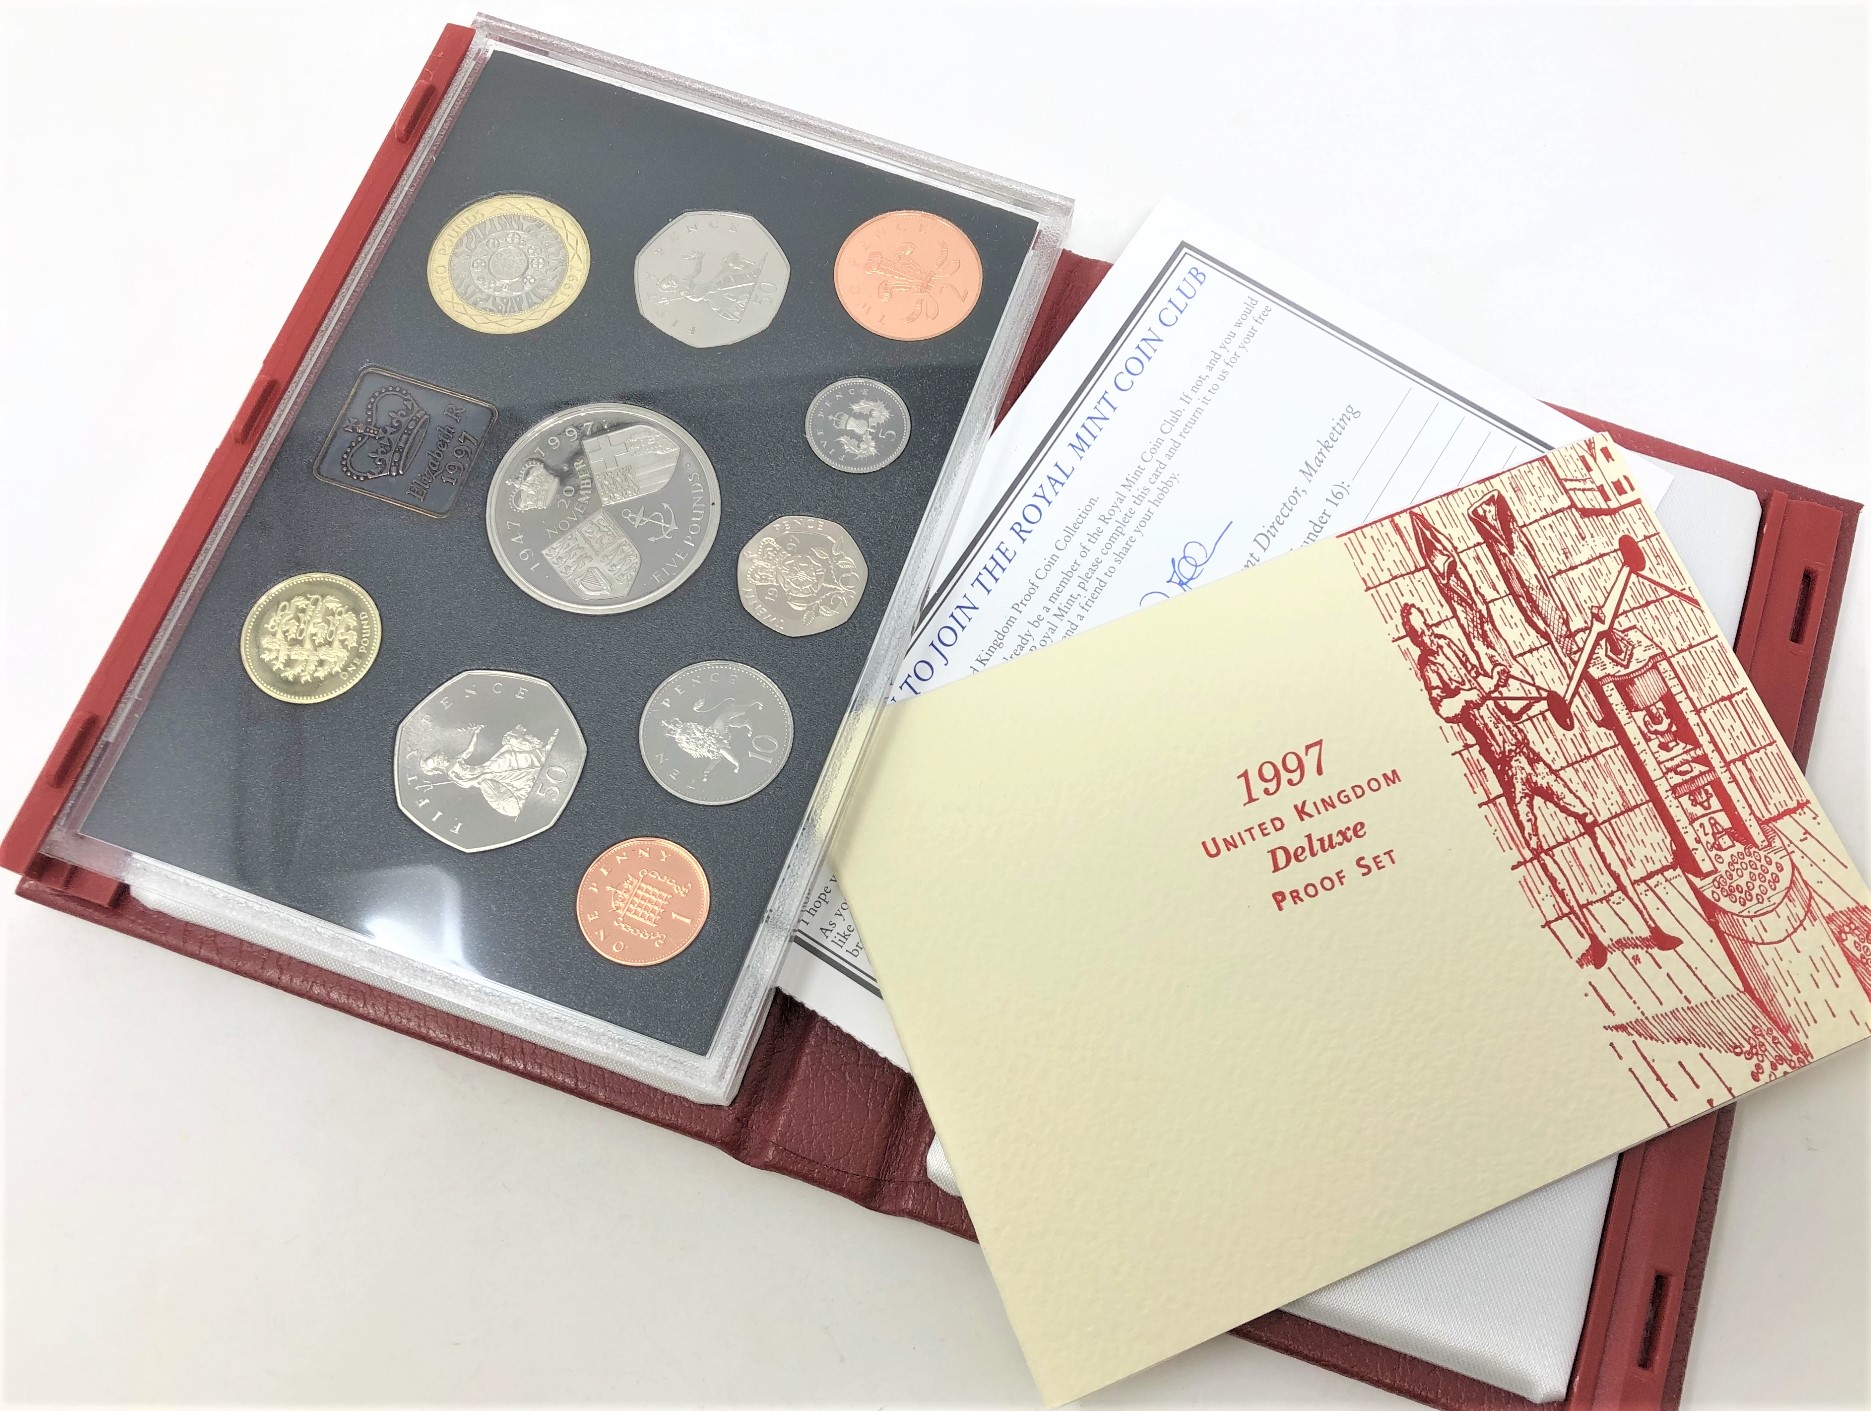 Royal Mint - United Kingdom proof coin collection 1997 (red)